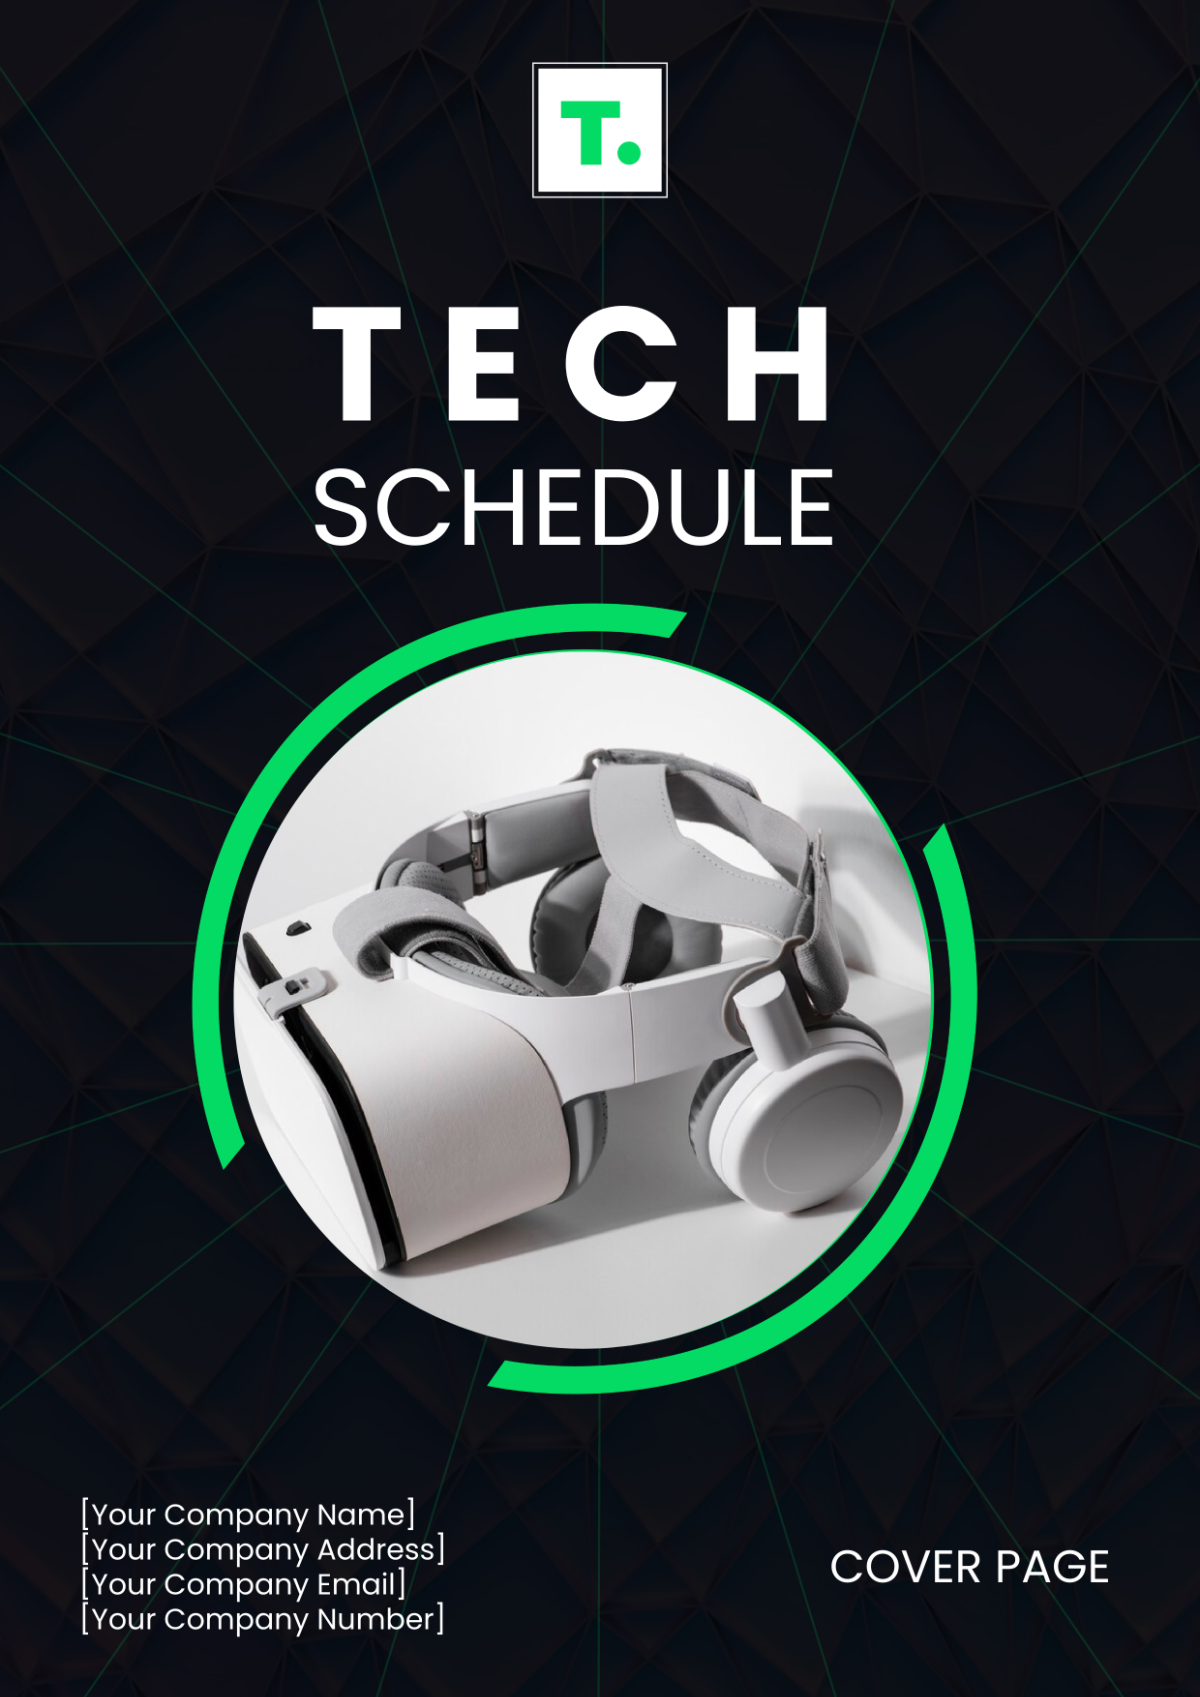 Tech Schedule Cover Page